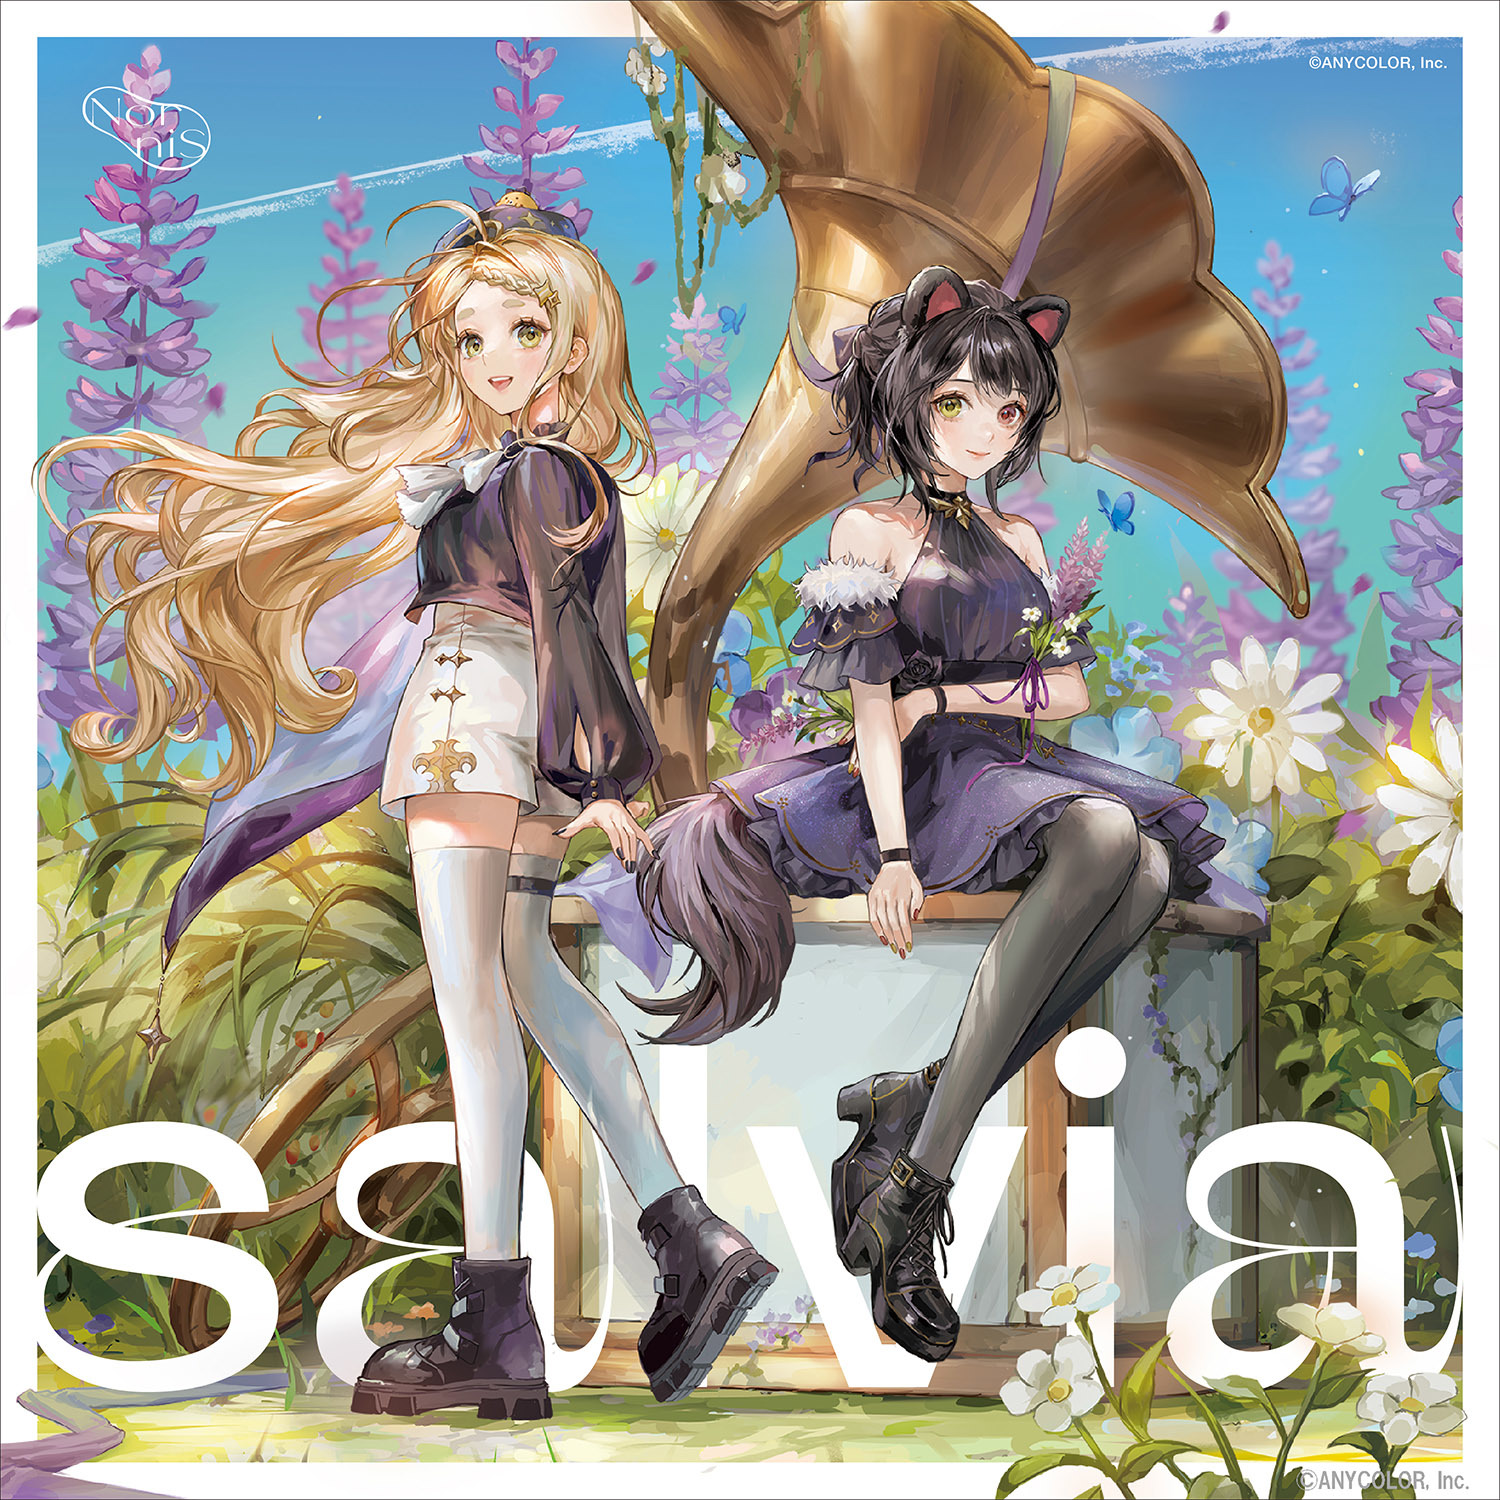 Nornis 2nd Single『salvia』ジャケット （c）ANYCOLOR, Inc.